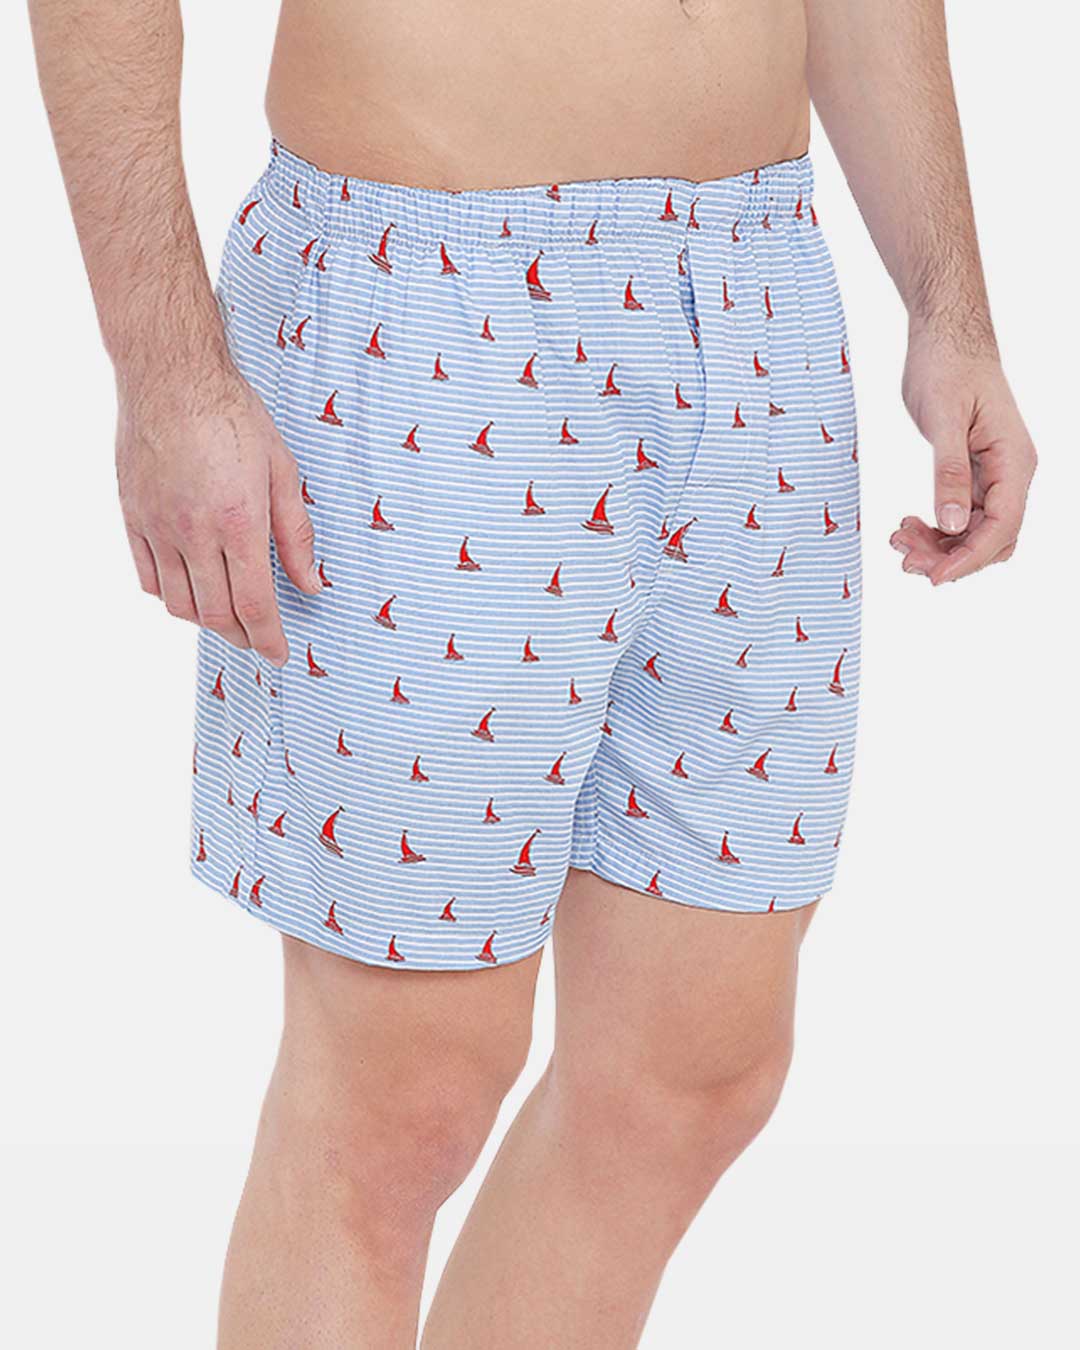 Shop Super Combed Cotton Printed Boxers For Men (Pack Of 1) Nautical Stripe-Back